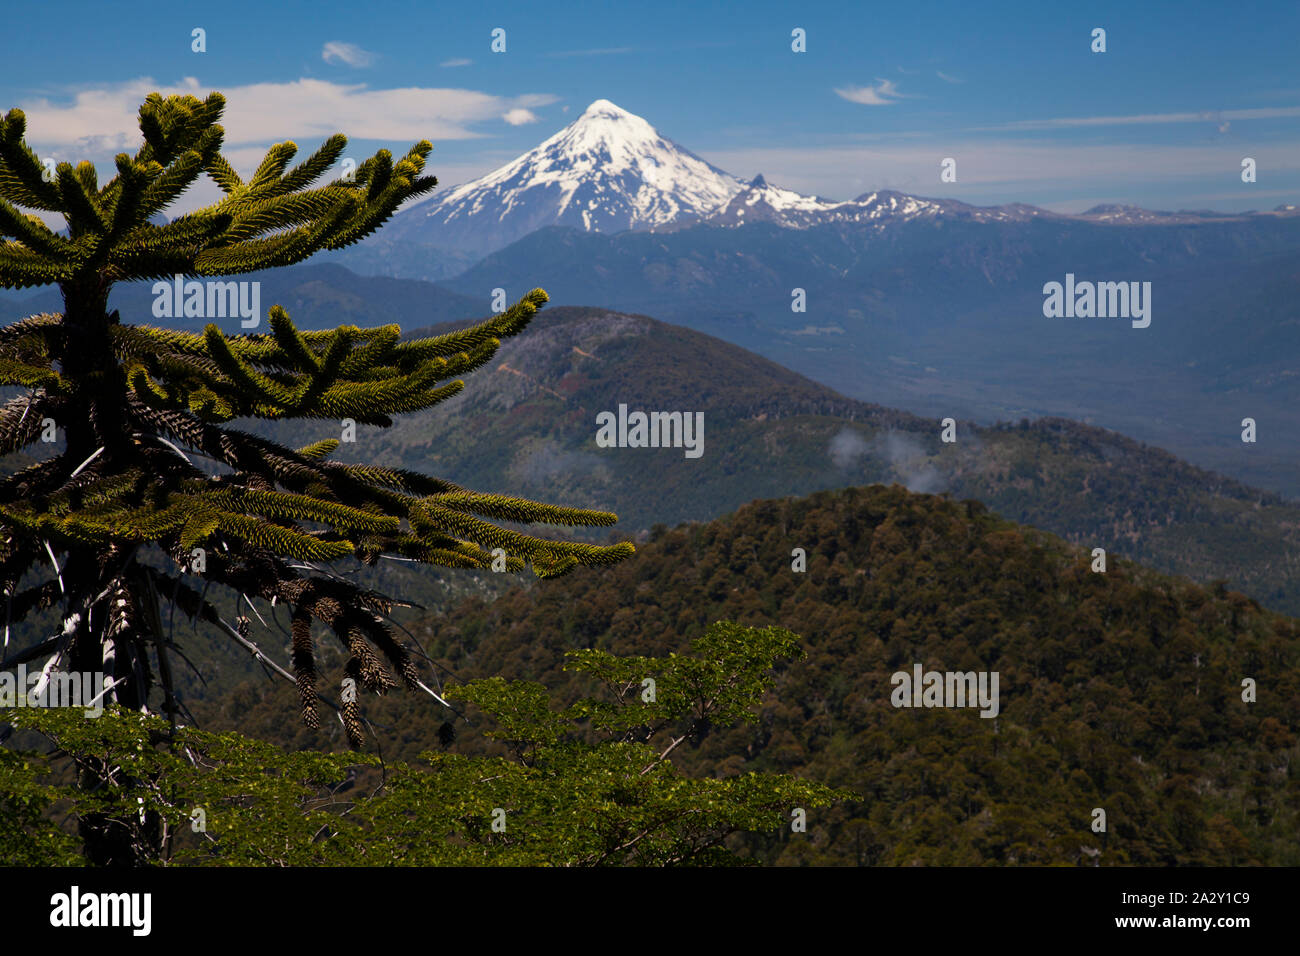 Lanin volcano and a monkey puzzle tree, Araucaria araucana, seen from the viewpoint in El Cani Sanctuary, near Pucon. Stock Photo